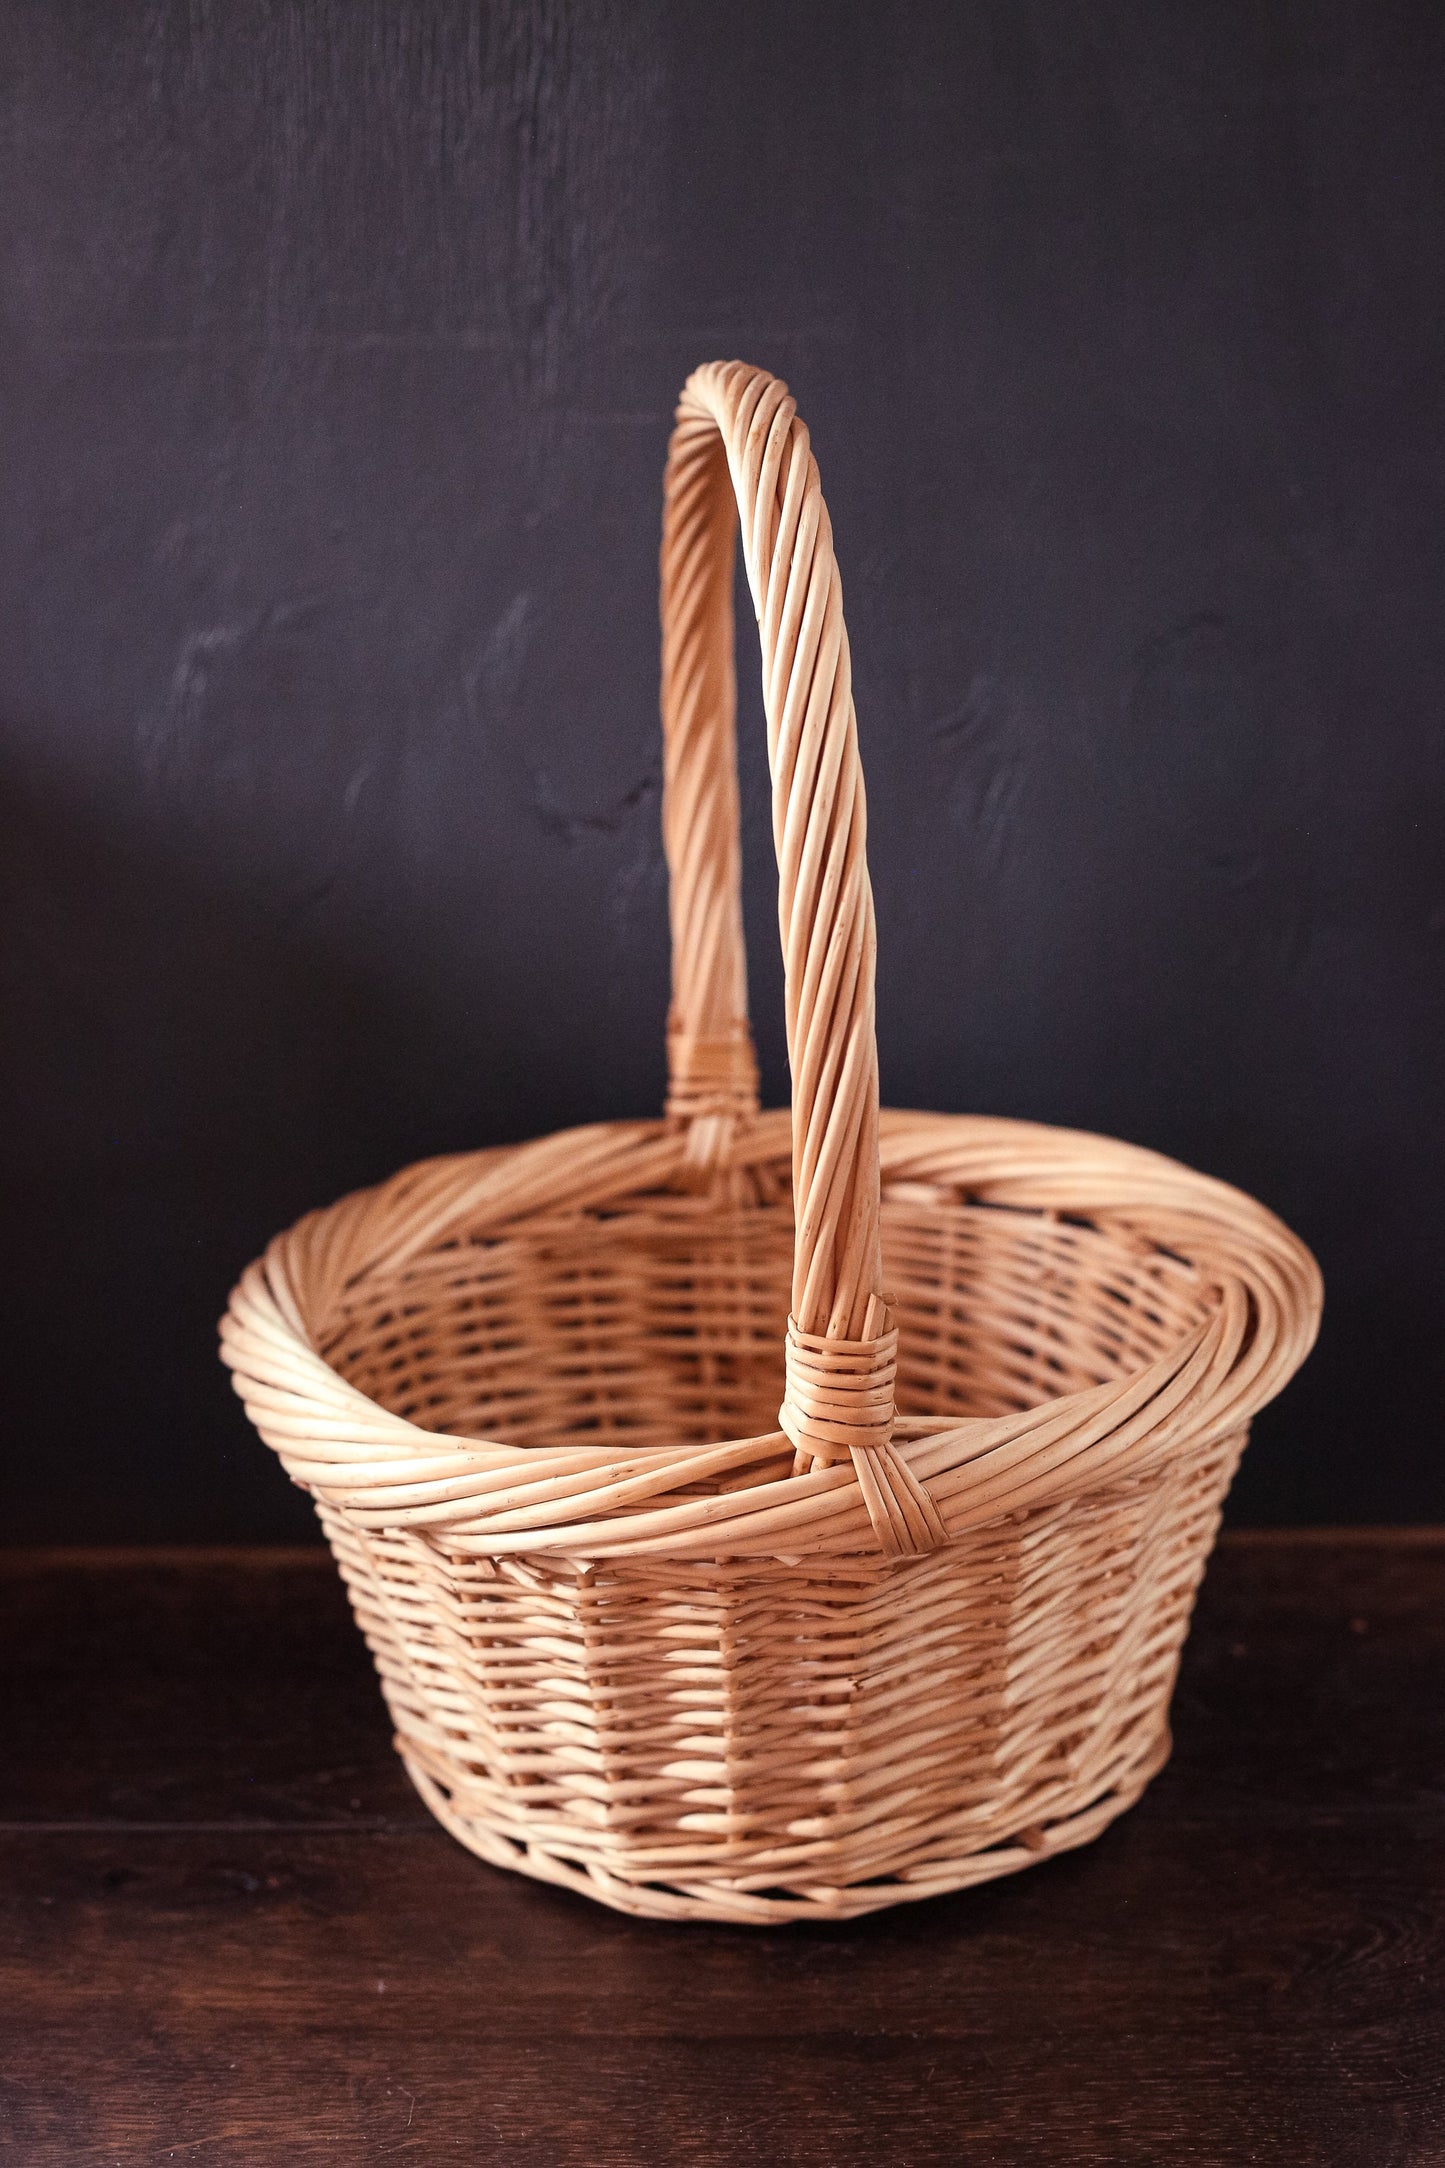 Round Flat Bottom Bleached Willow Basket with High Handle - Vintage Wicker Rattan Basket